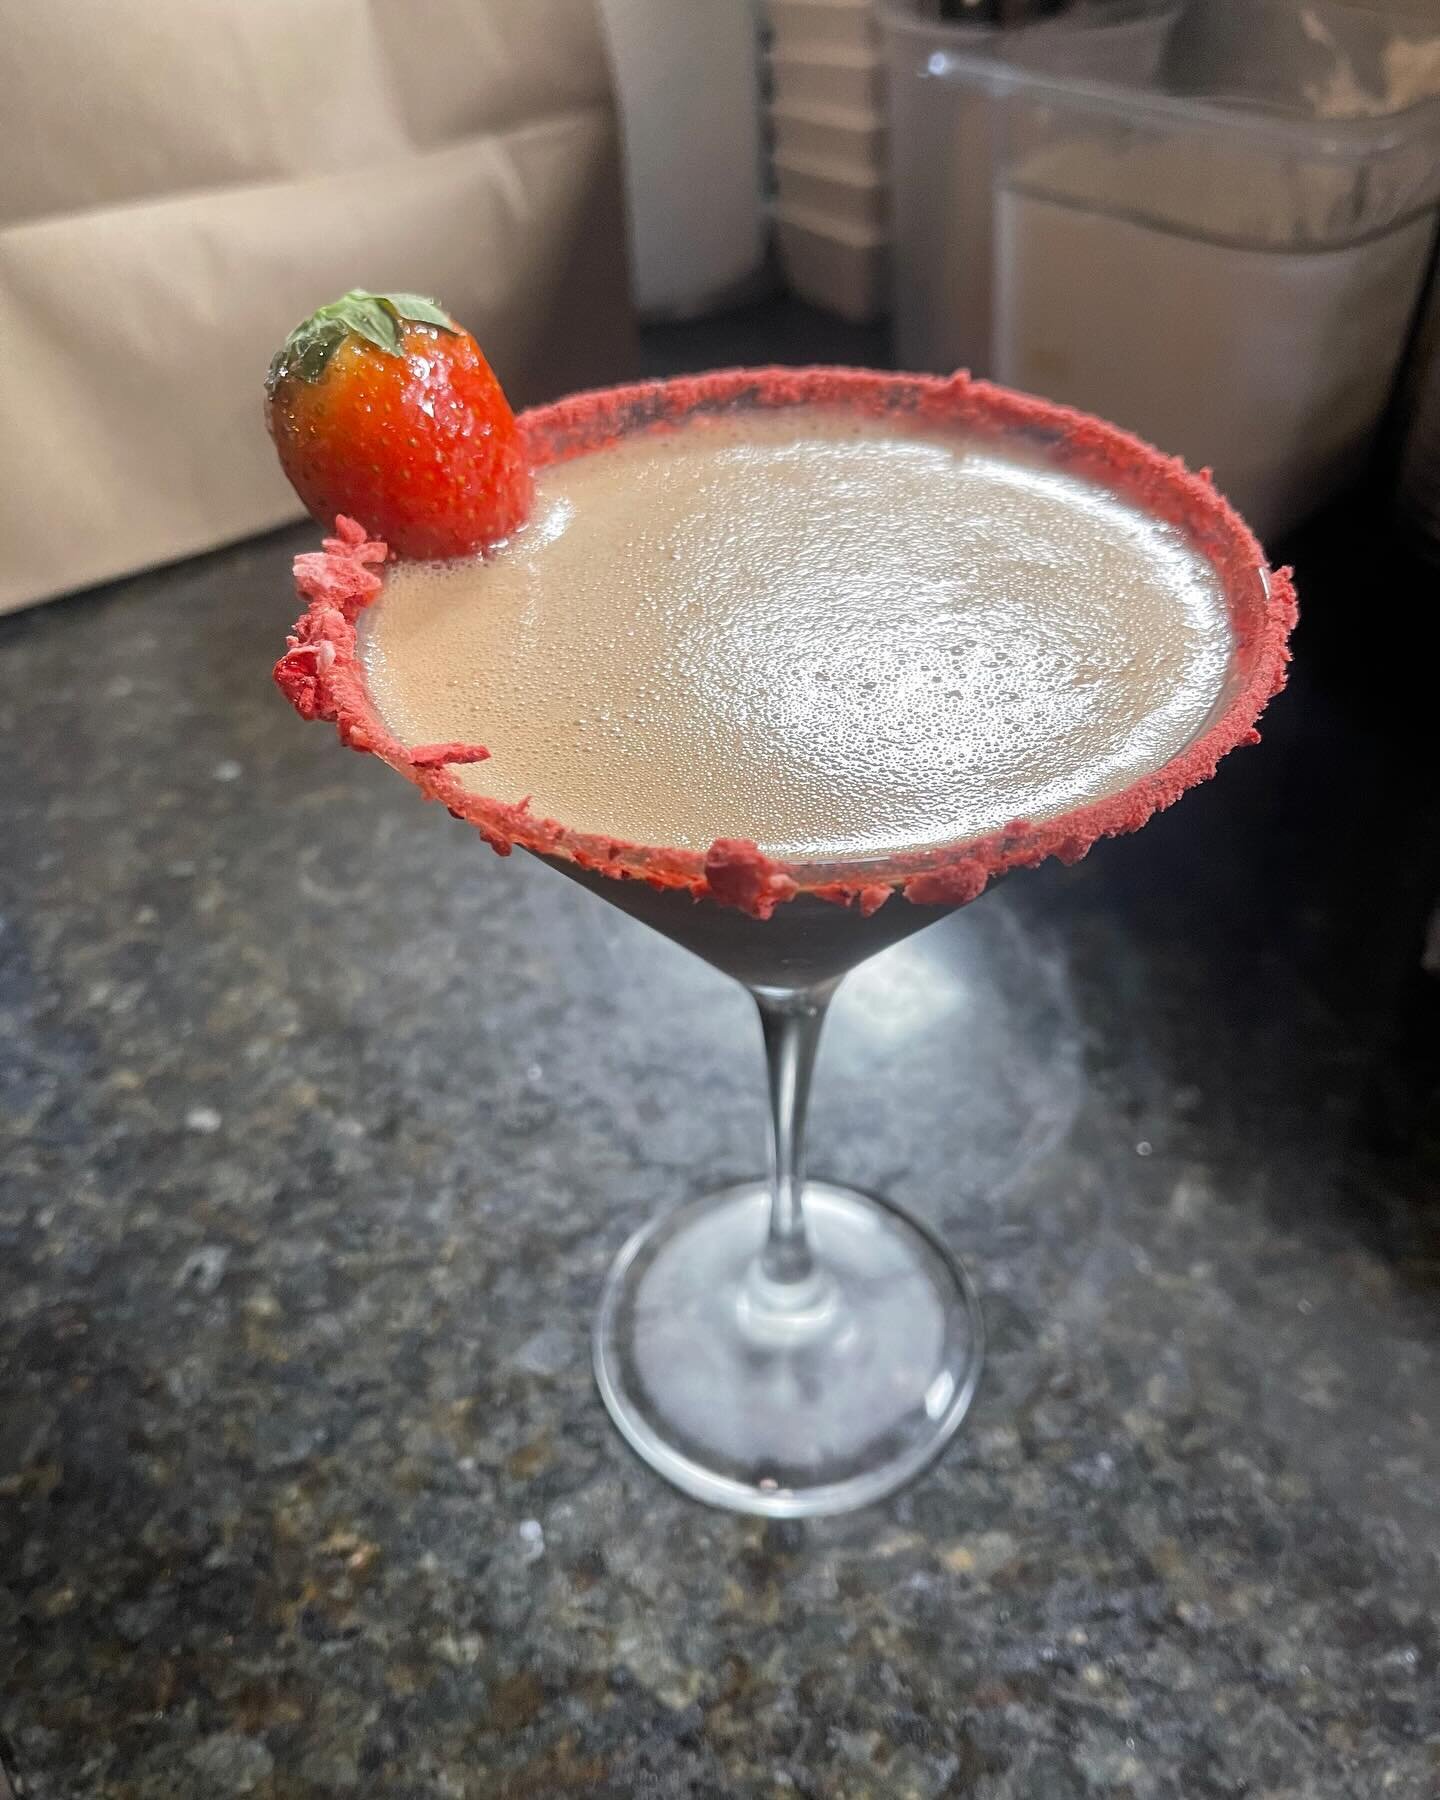 We are introducing two very special Valentine&rsquo;s Day cocktails:
Chocolate-Strawberry Martini and a Passion Fruit Paloma with hint of Cayenne